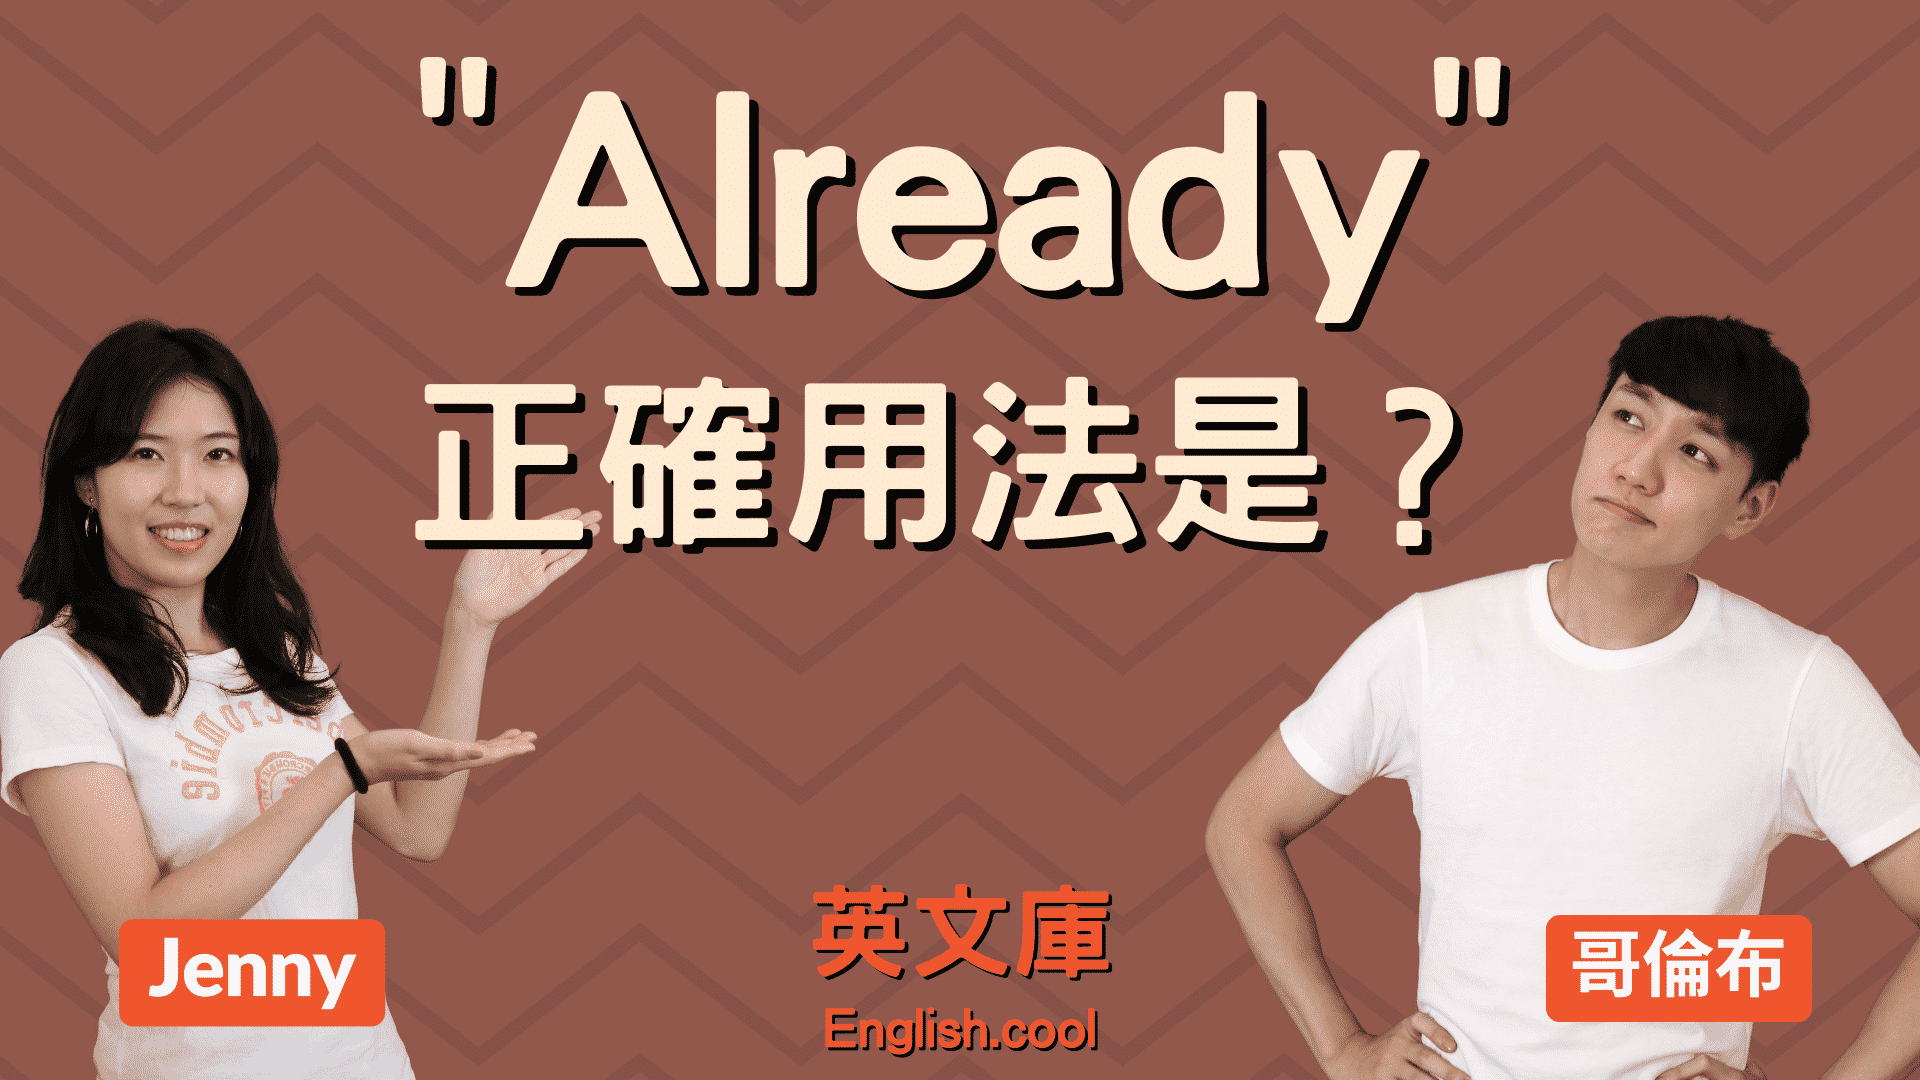 You are currently viewing 「Already」正確用法是？